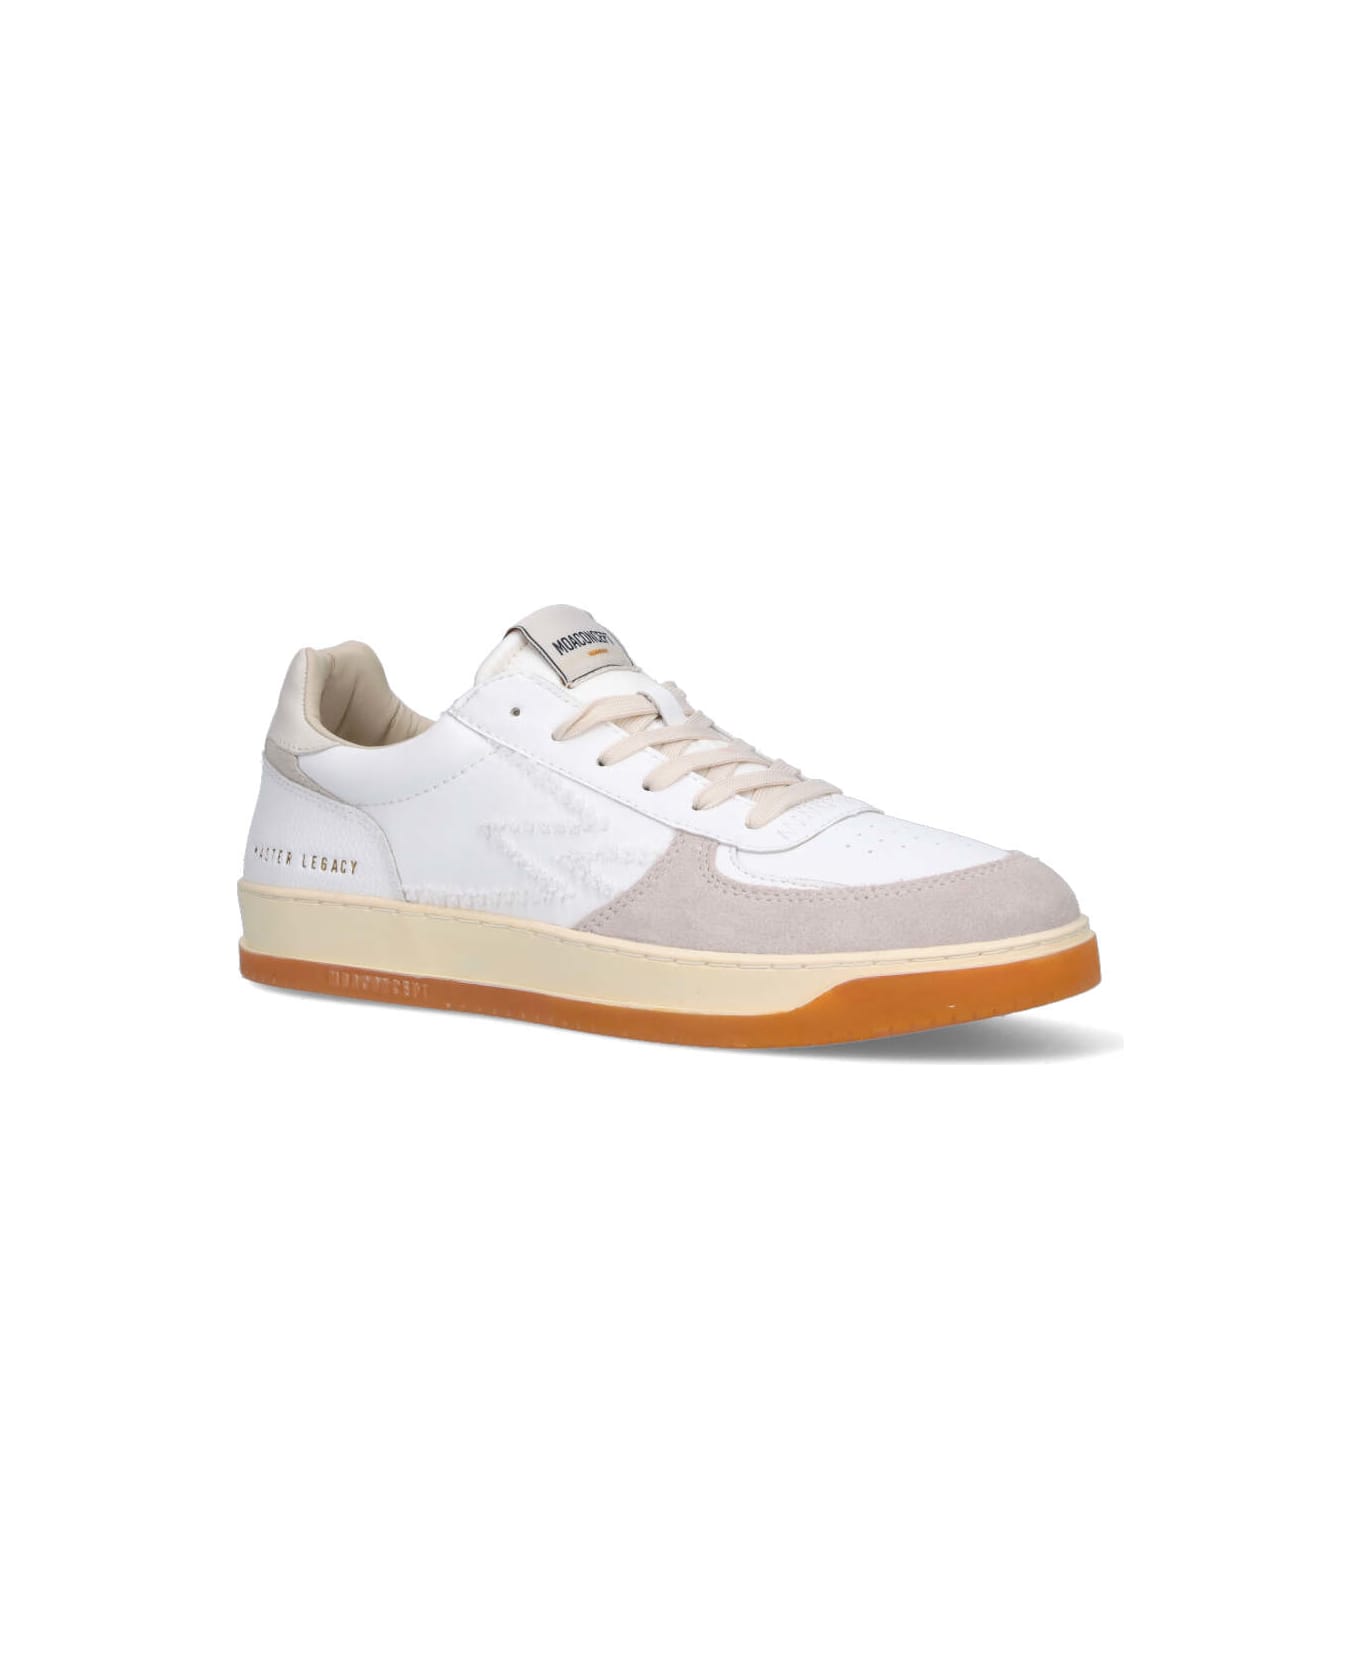 M.O.A. master of arts "legacy" Sneakers - White